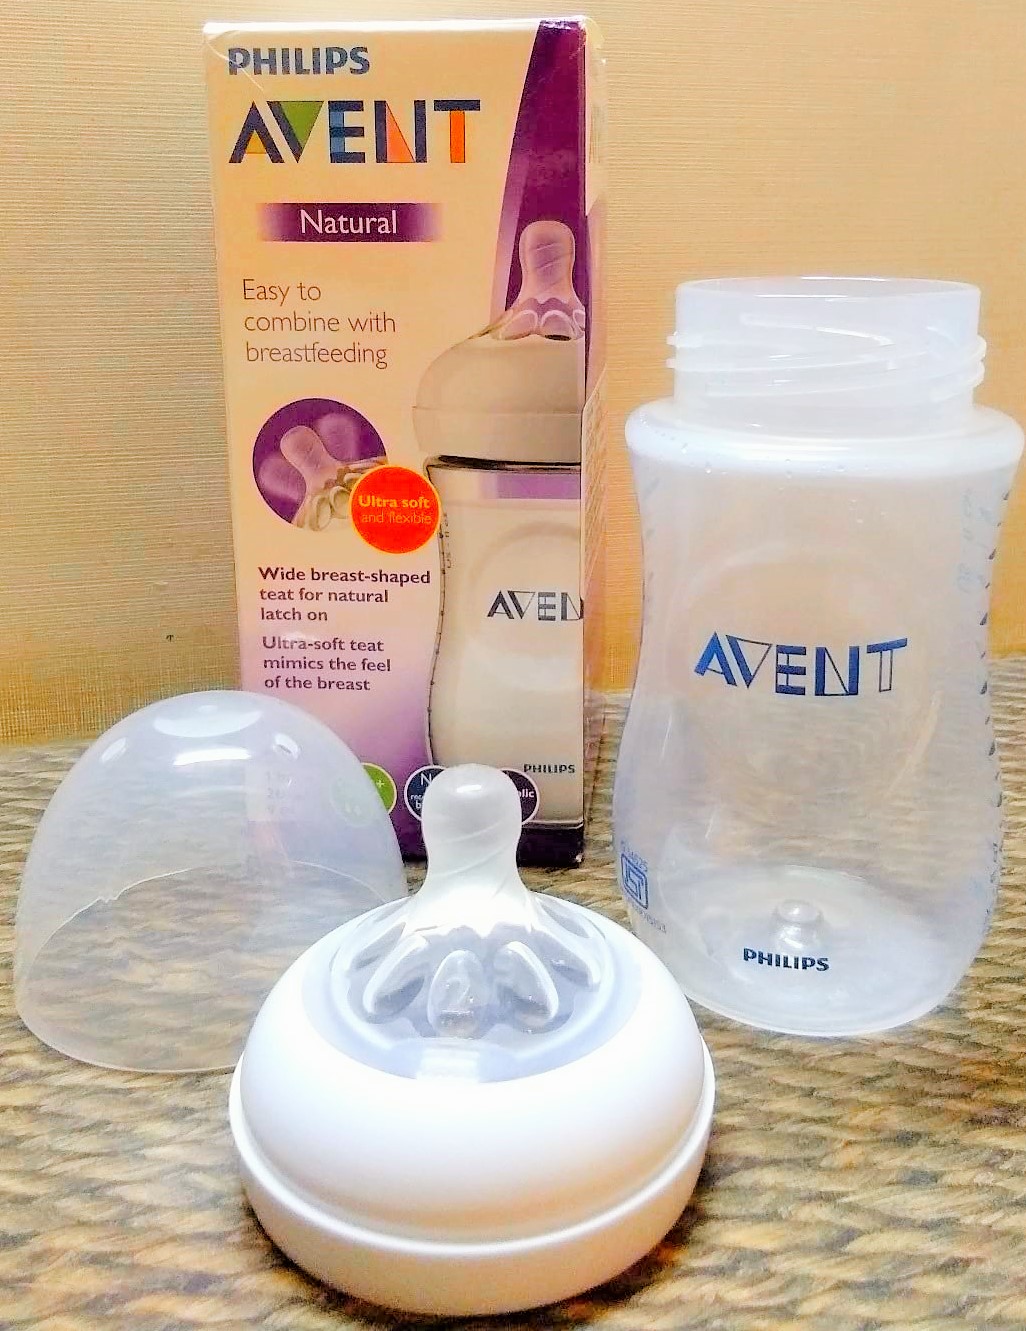 Philips Avent Bottle Review